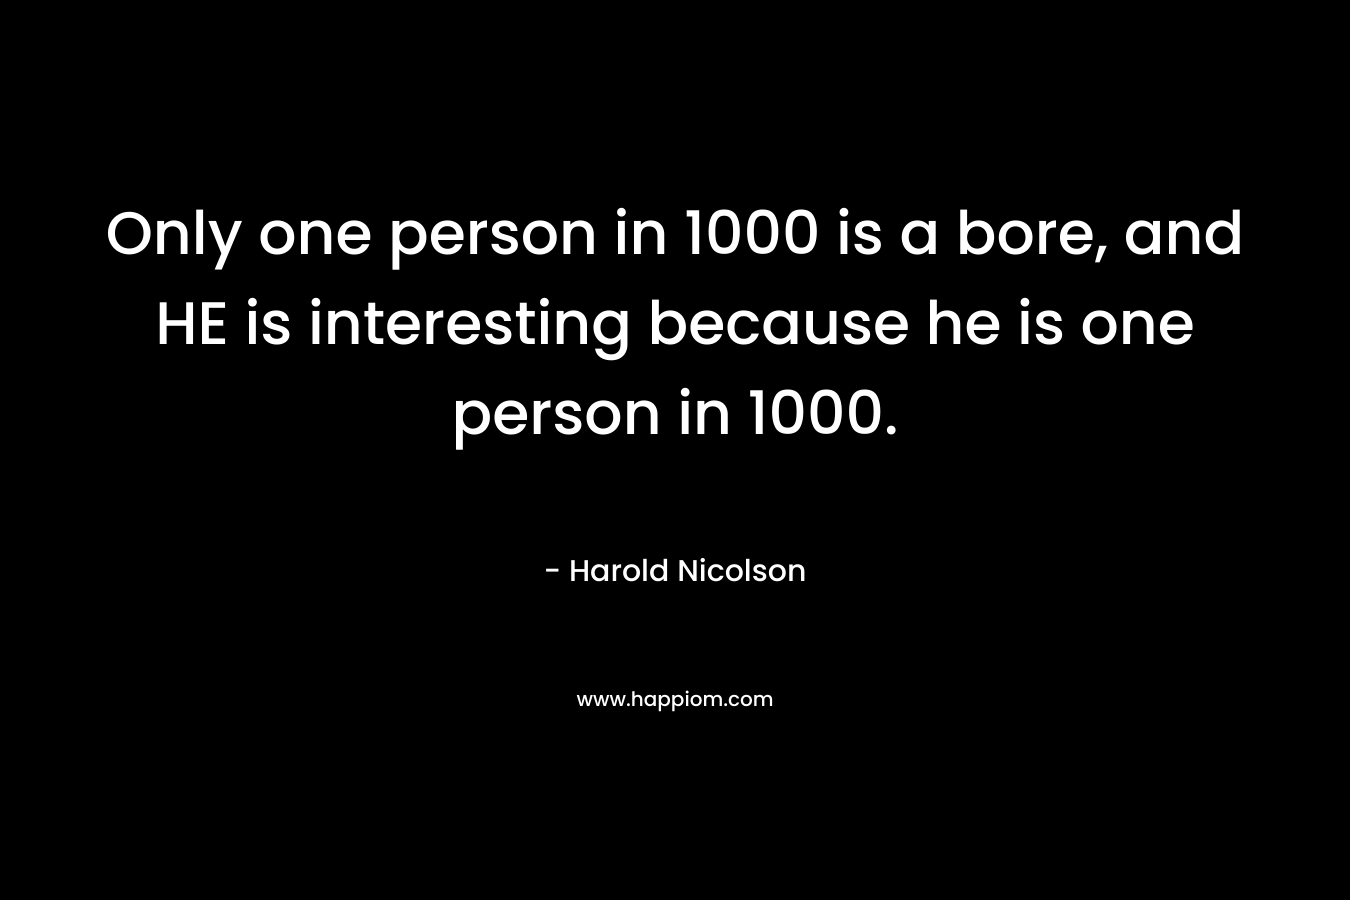 Only one person in 1000 is a bore, and HE is interesting because he is one person in 1000.